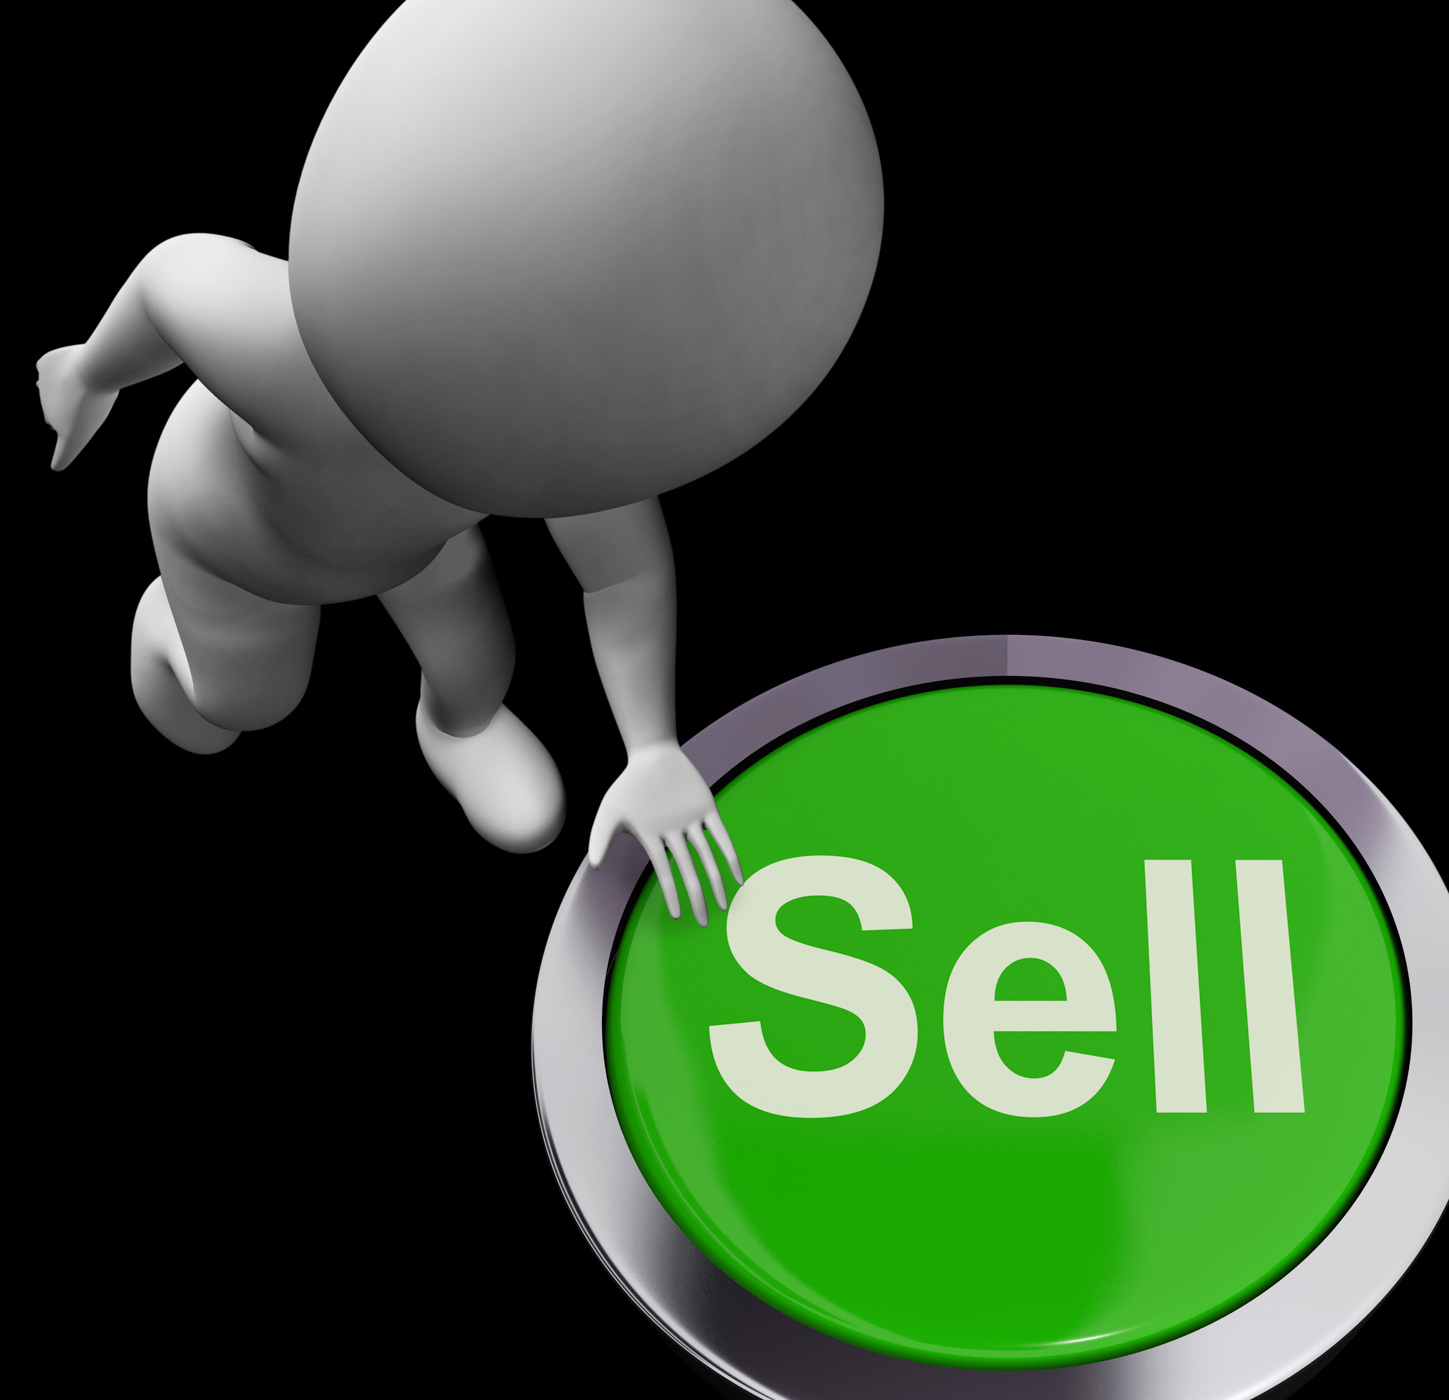 Sell button shows sales selling and business photo